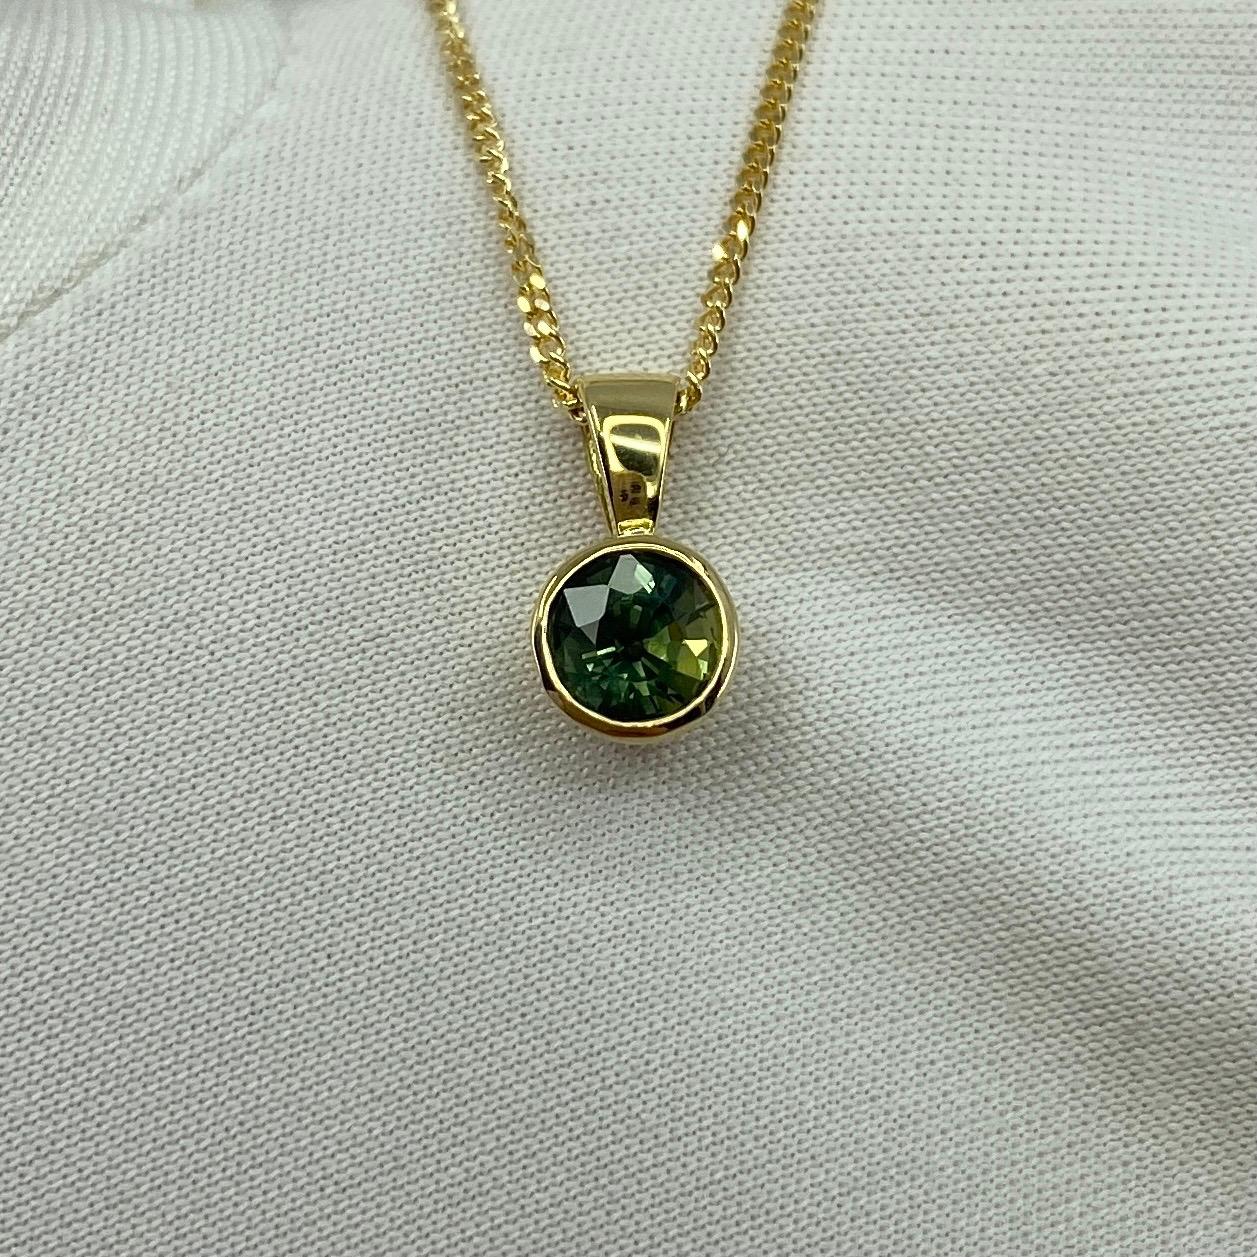 Round Cut Unique Bi Colour Green Yellow Untreated Sapphire 18k Yellow Gold Pendant Rubover For Sale